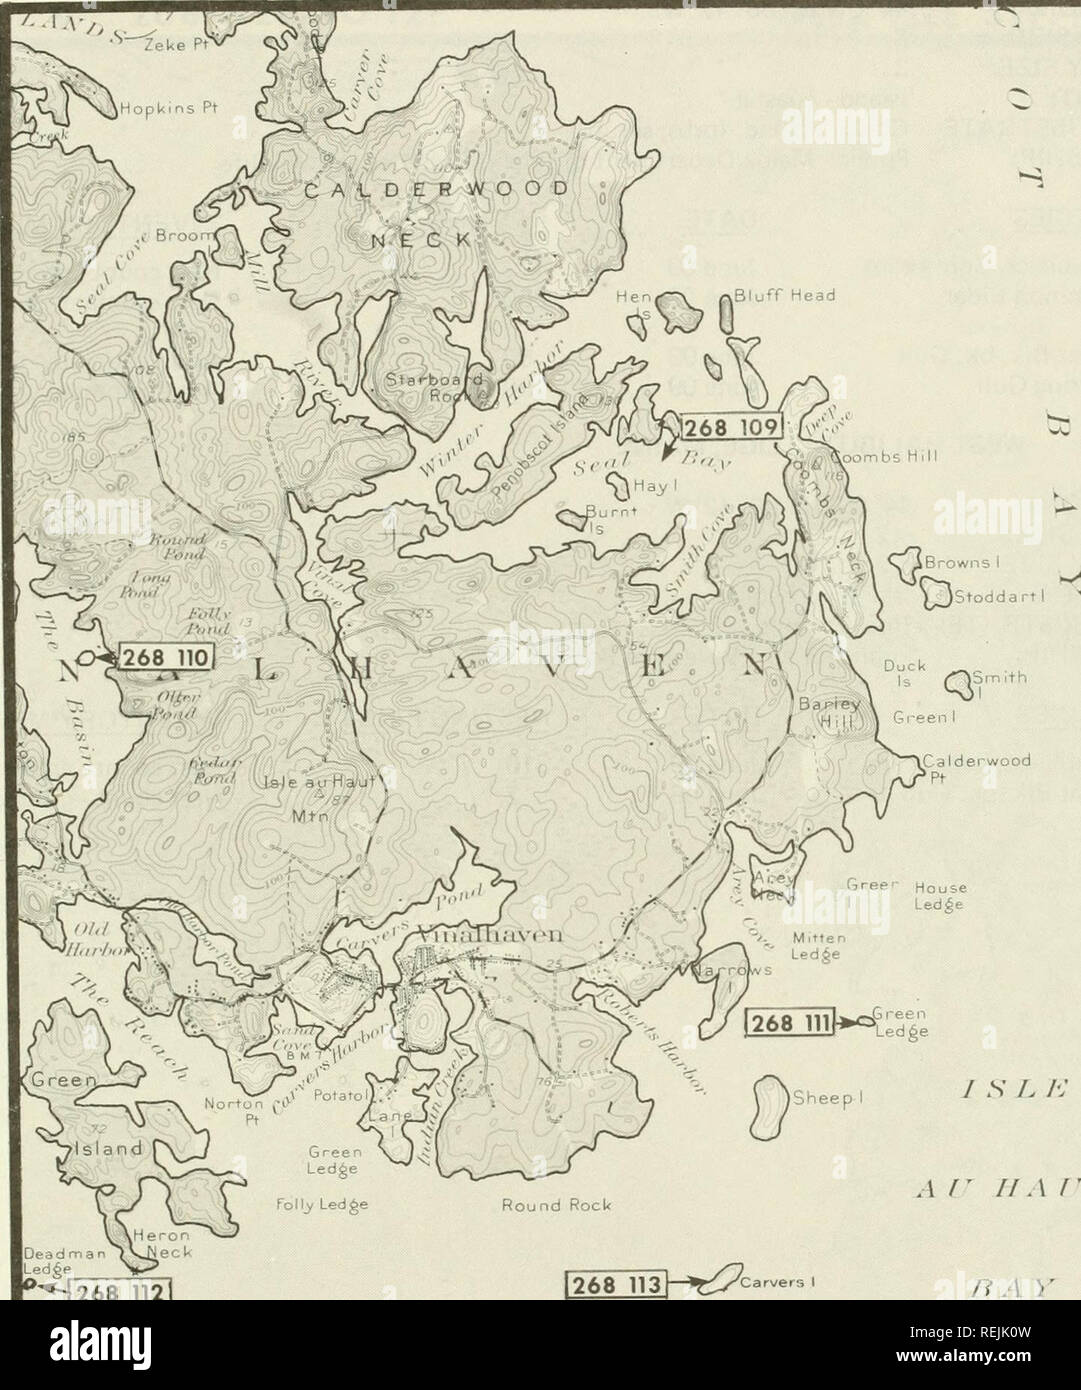 . Coastal waterbird colonies, Maine to Virginia, 1977 : an atlas showing colony locations and species composition. Sea birds -- Atlantic States; Birds -- Atlantic States. U 268 109 TO 119 VINALHAVEN SE/4. Deadman fc^JBLGC* Led6e '^-J268 112] Heron Neck Ledge 268 n3h-^VCar&quot;er5 AU II A r T ha y Arey Ledges 268 114} Hay Is Channel RocU [268 JlSlyQ ^f268116l BfeOJKgg? Oiamo nd Rock Little Brimstoae [268 117 Otter 1268 119:- r i m stone irimstone I Holden Ledge 79. Please note that these images are extracted from scanned page images that may have been digitally enhanced for readability - color Stock Photo